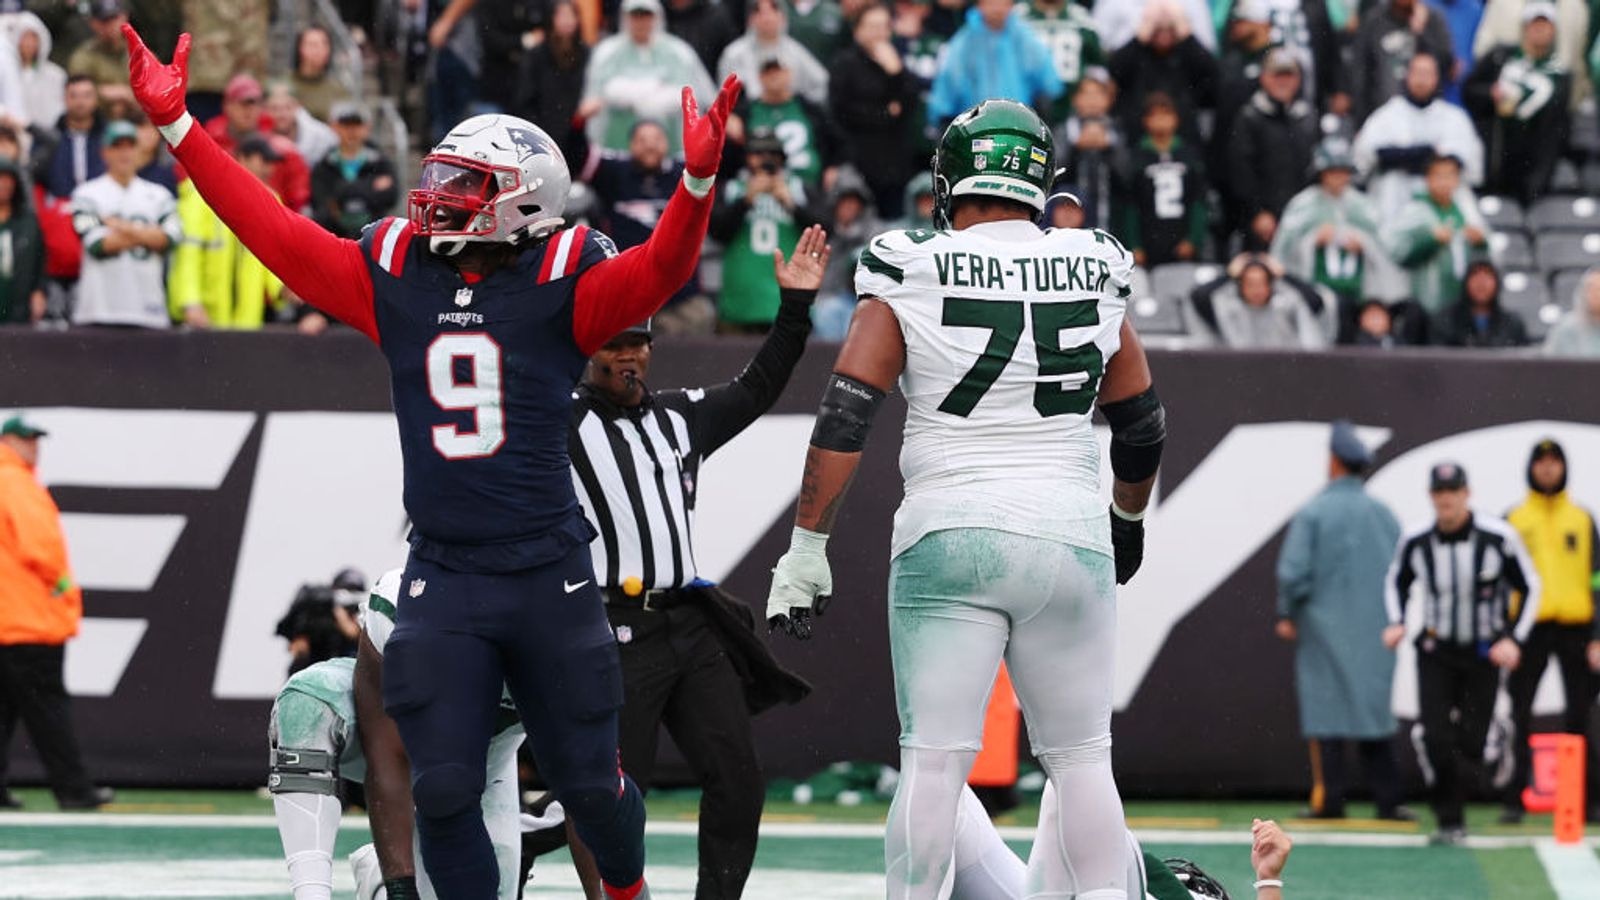 BSJ Game Report: Patriots 15, Jets 10 - First win comes as defense